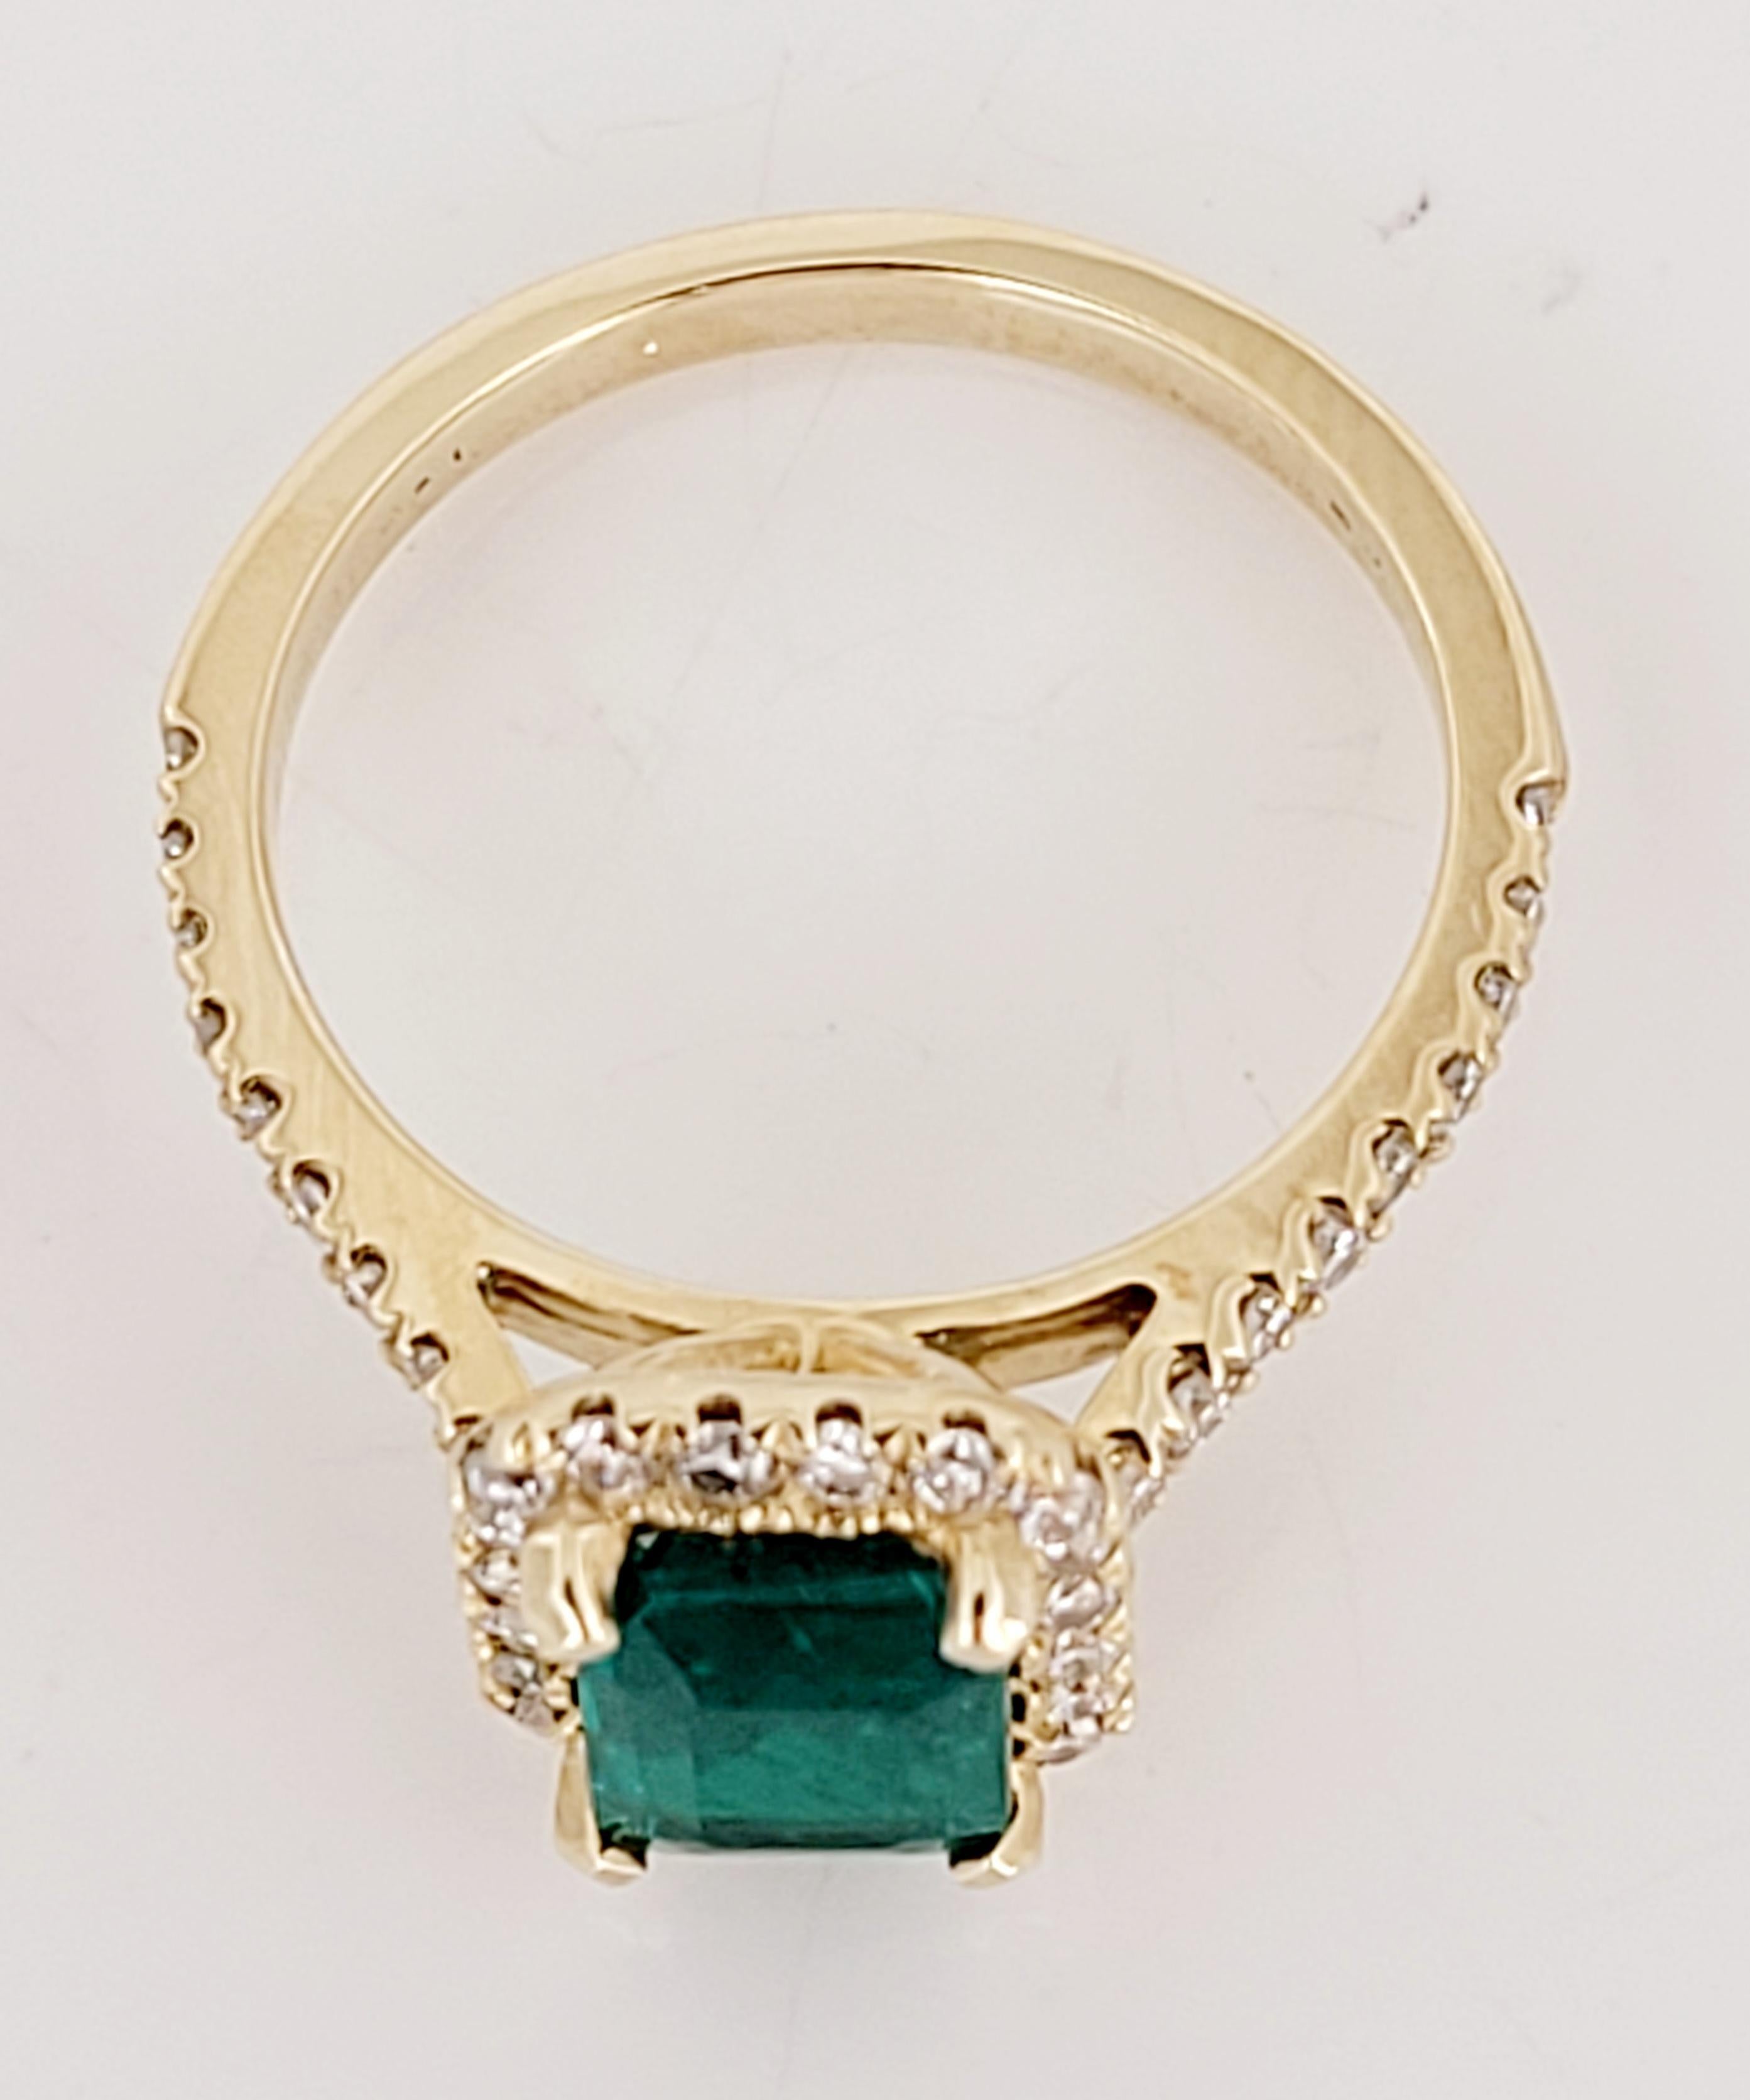 Emerald Cut Emerald Ring with White Diamond and 14K Yellow Gold Neuf - En vente à New York, NY